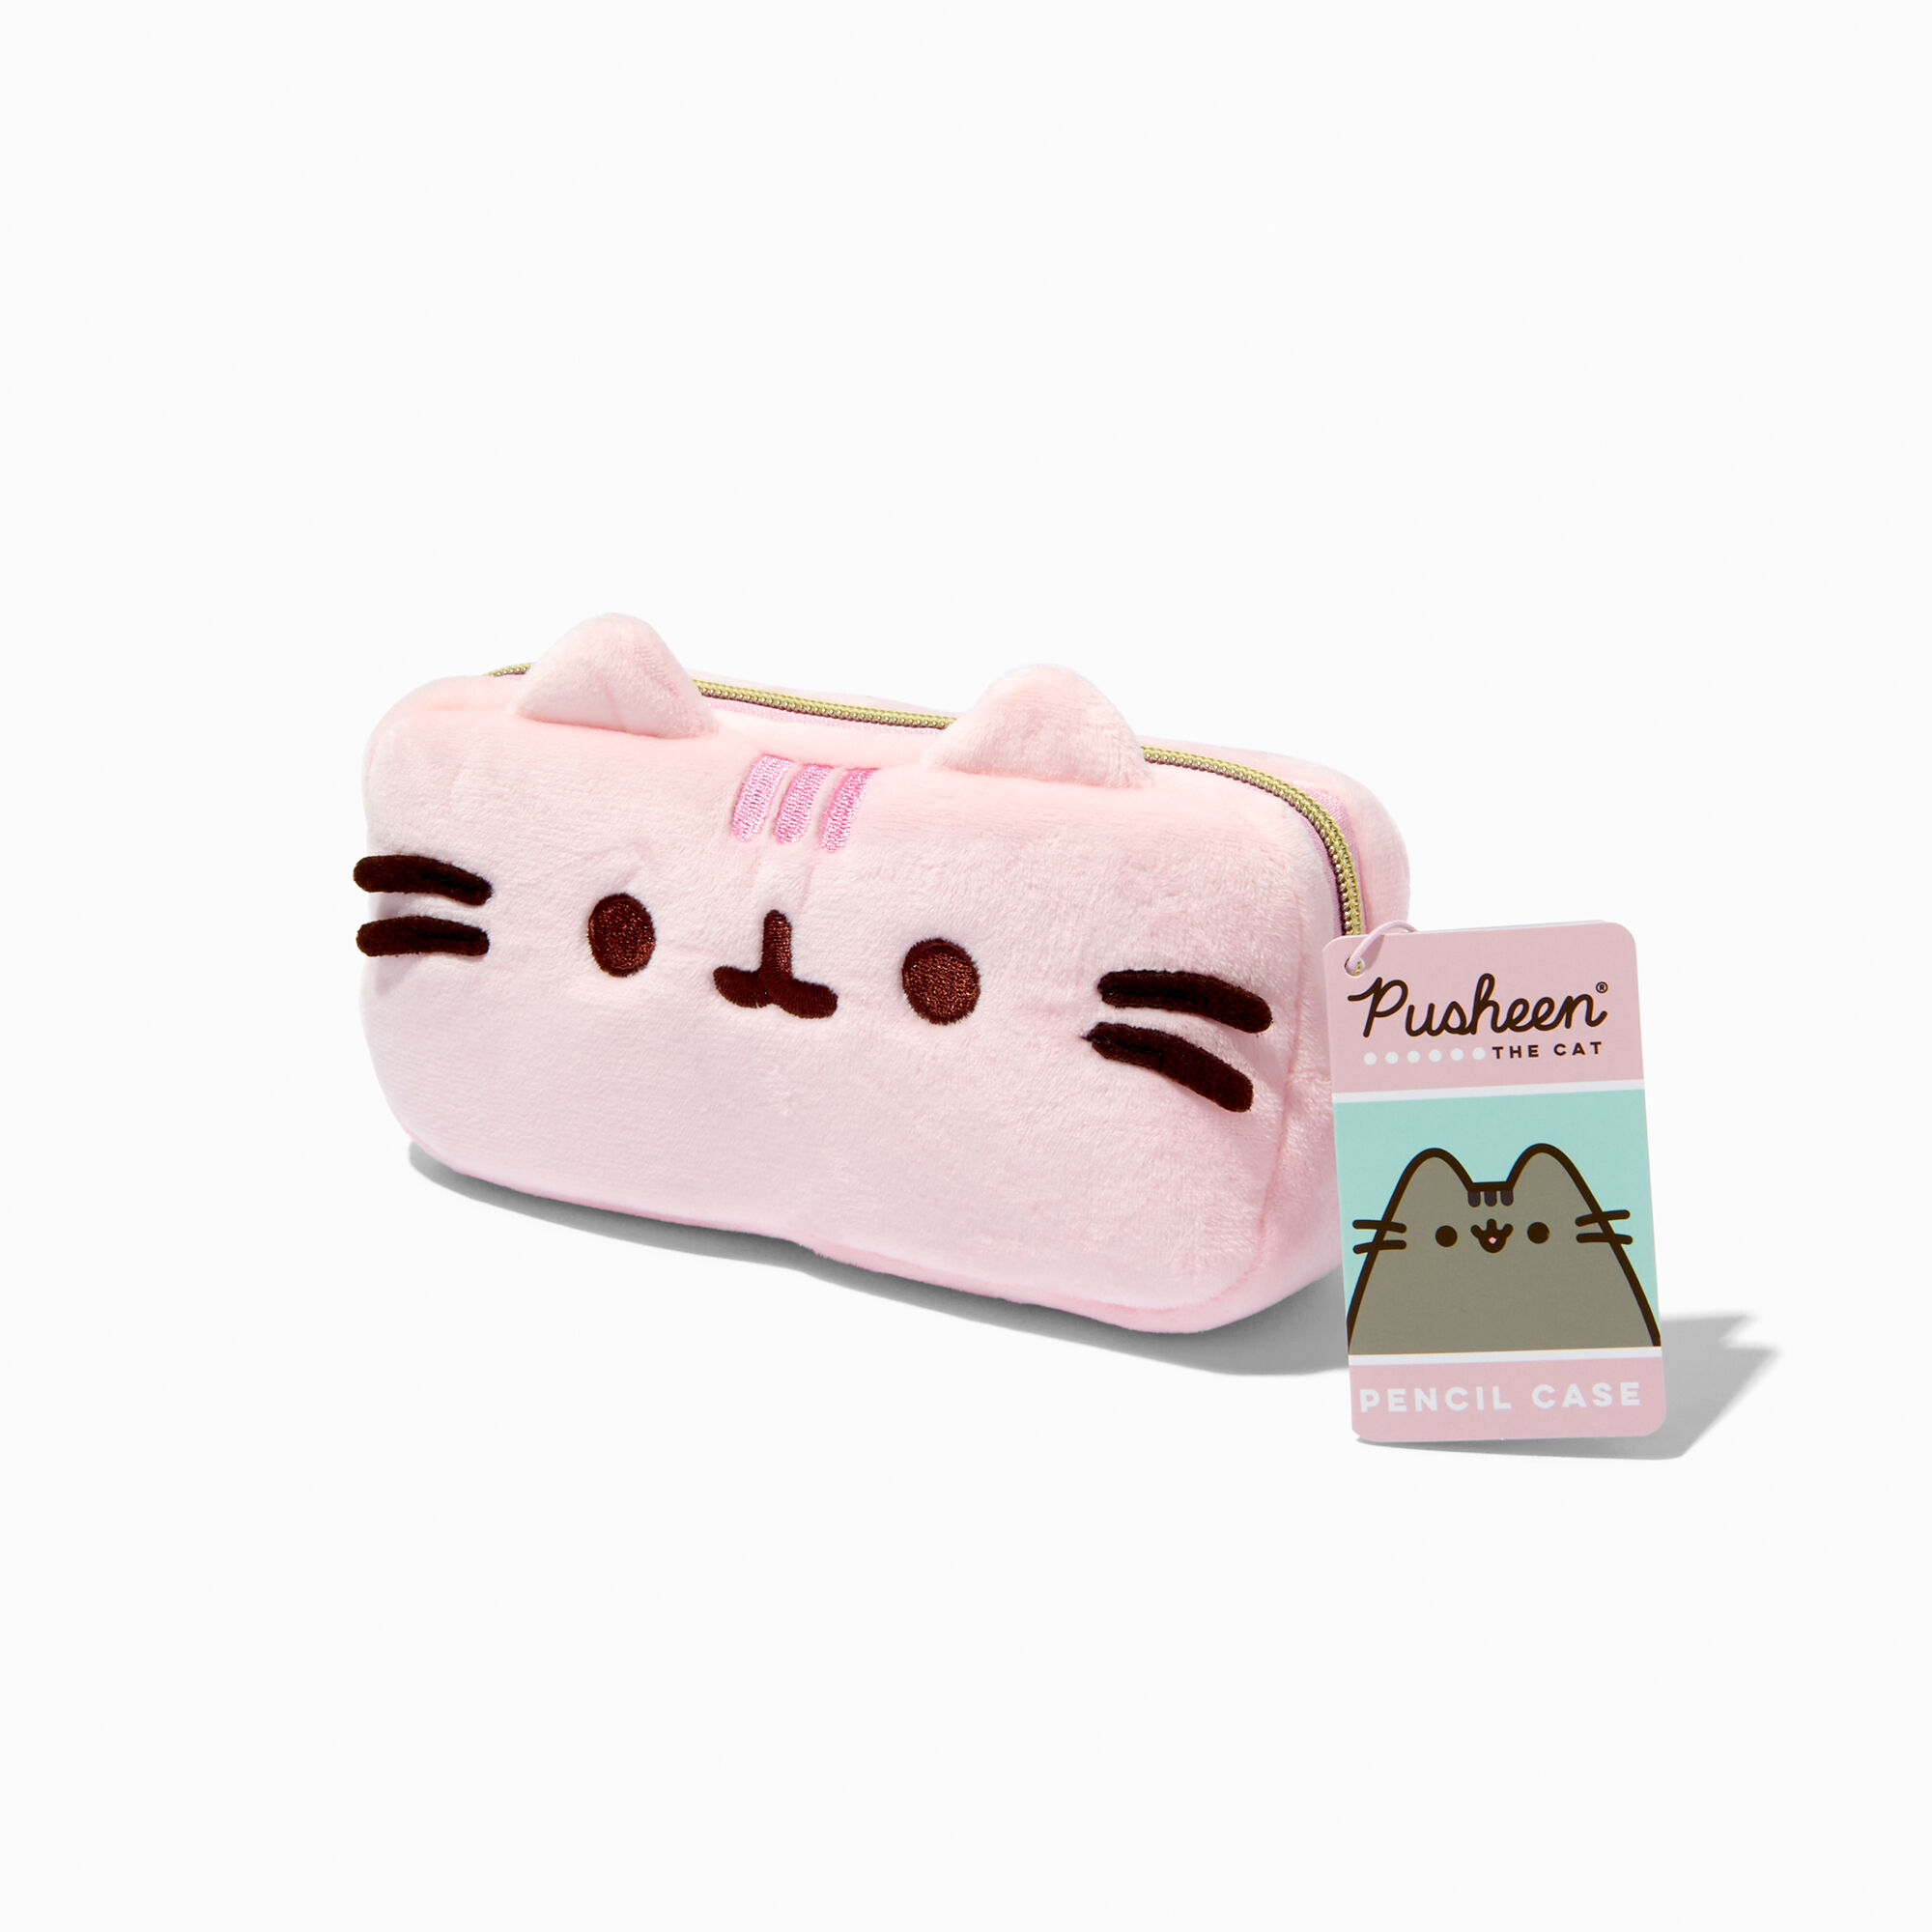 View Claires Pusheen Furry Pencil Case Pink information